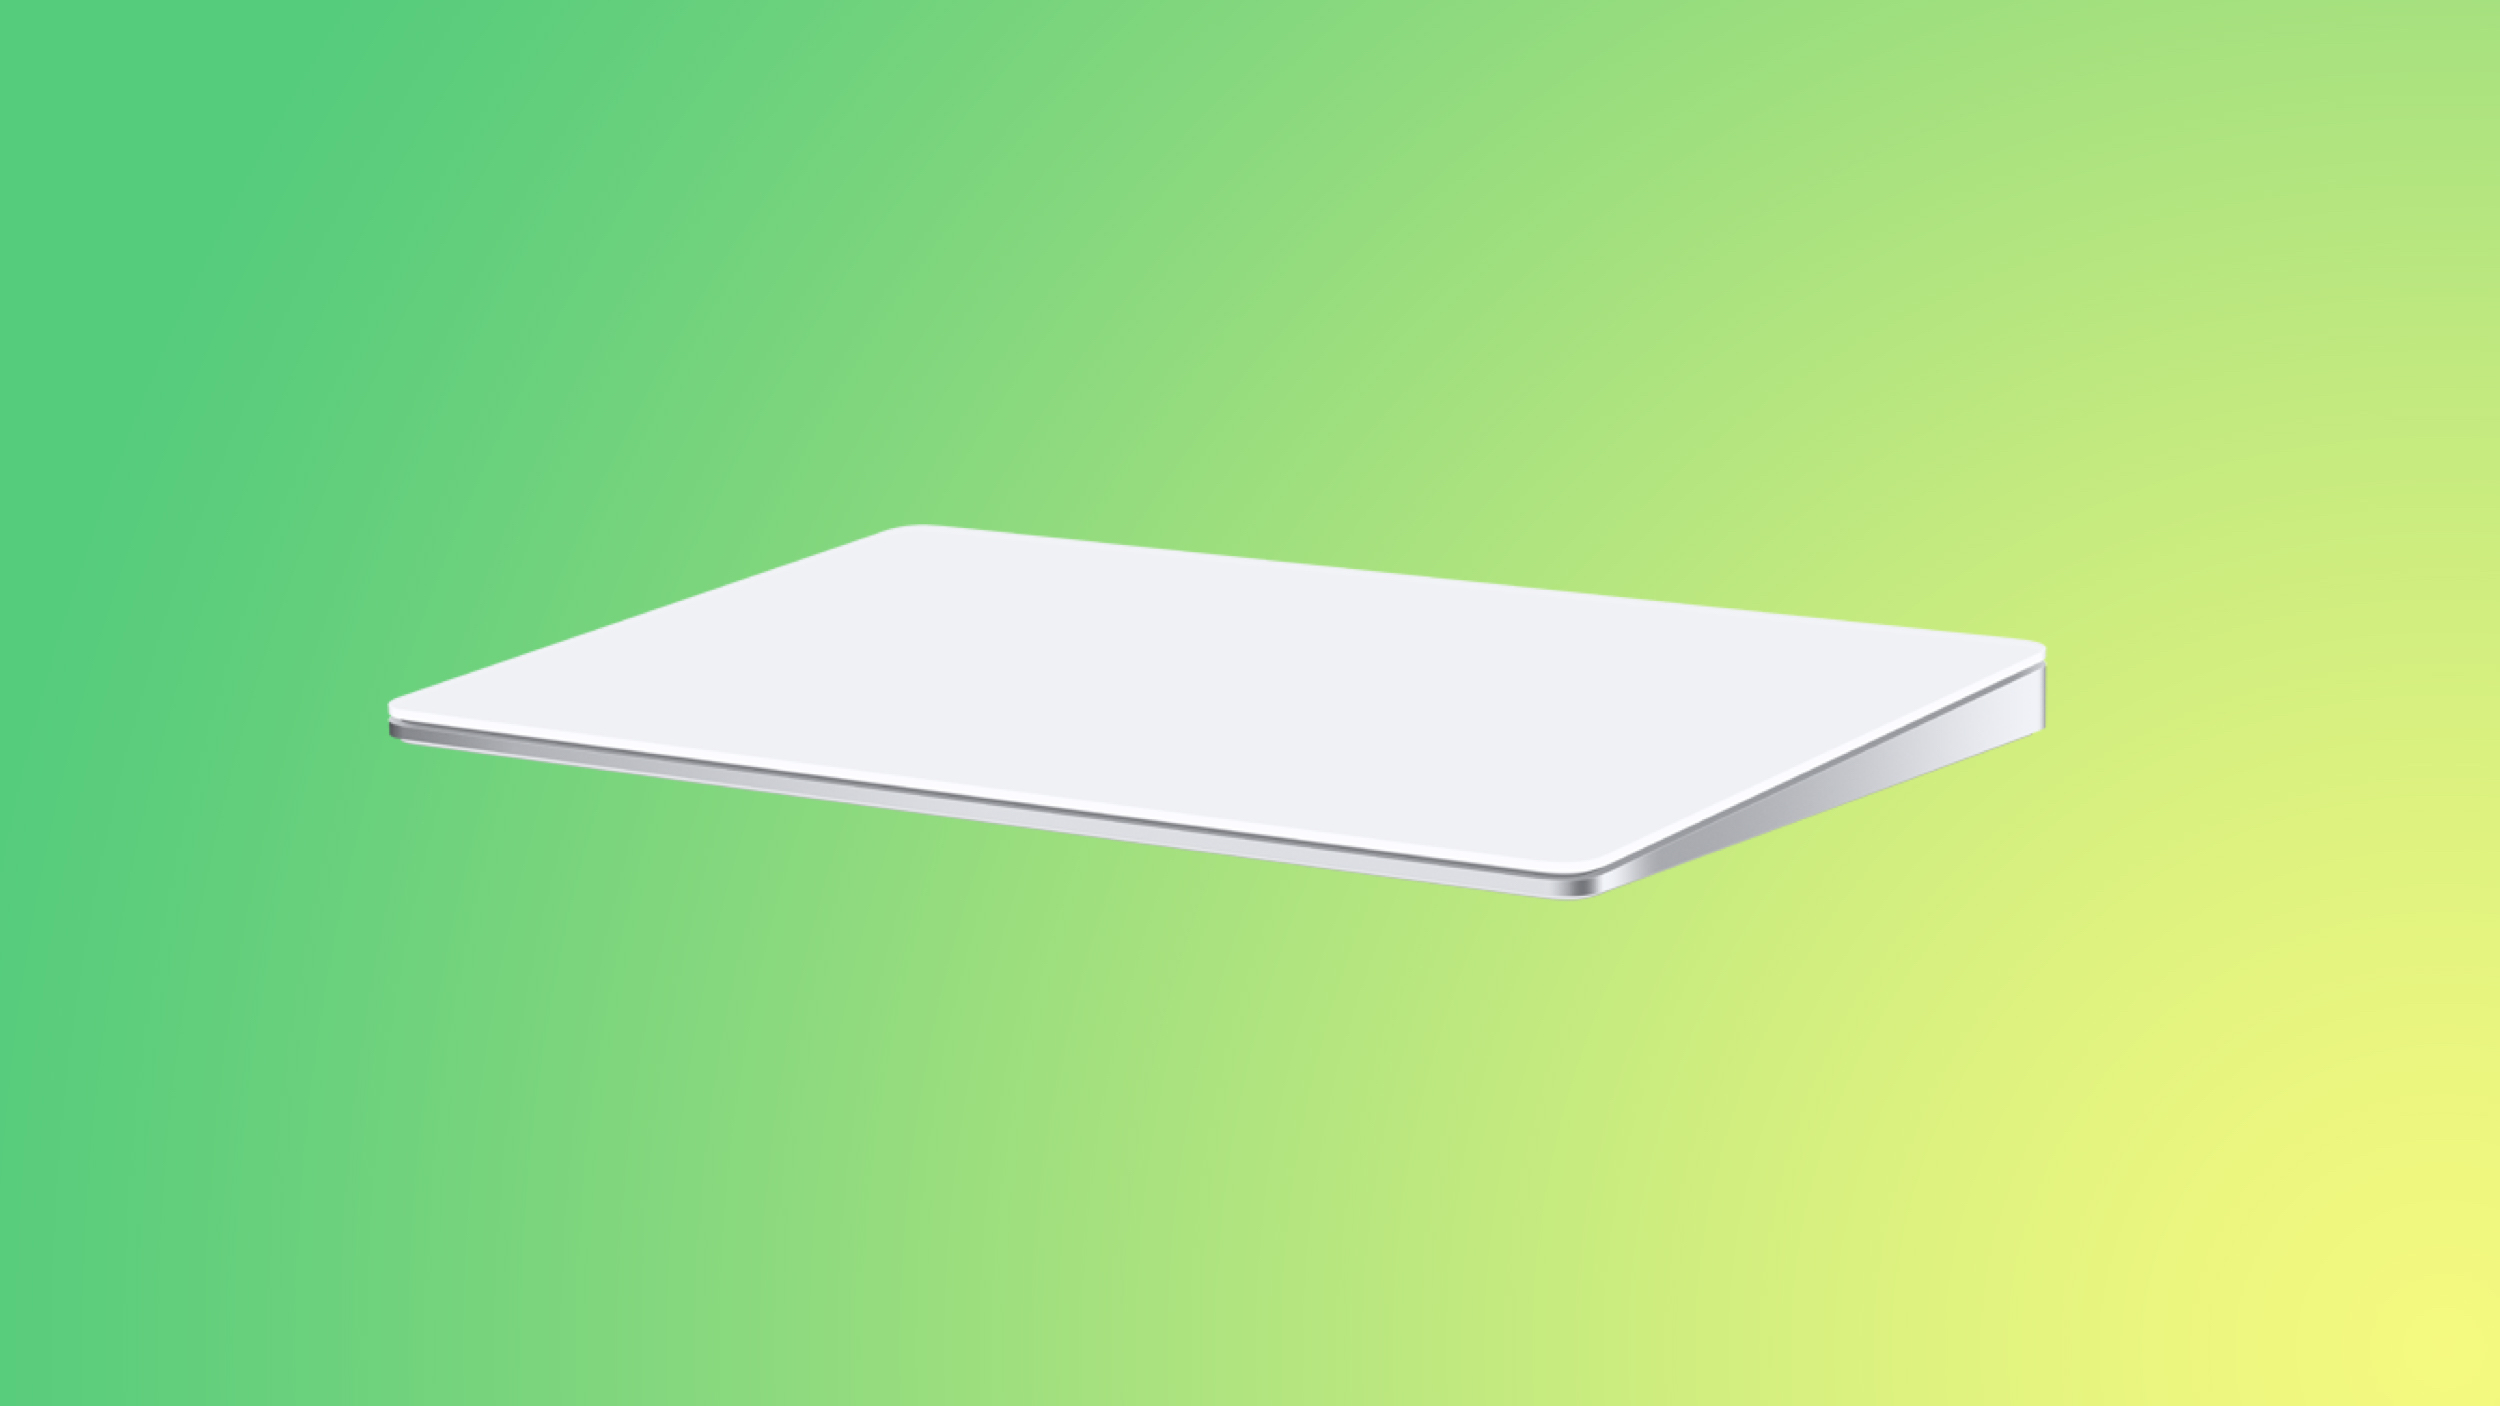 Deals: Magic Trackpad 2 Available for Low Price of $84.99 ($44 Off)